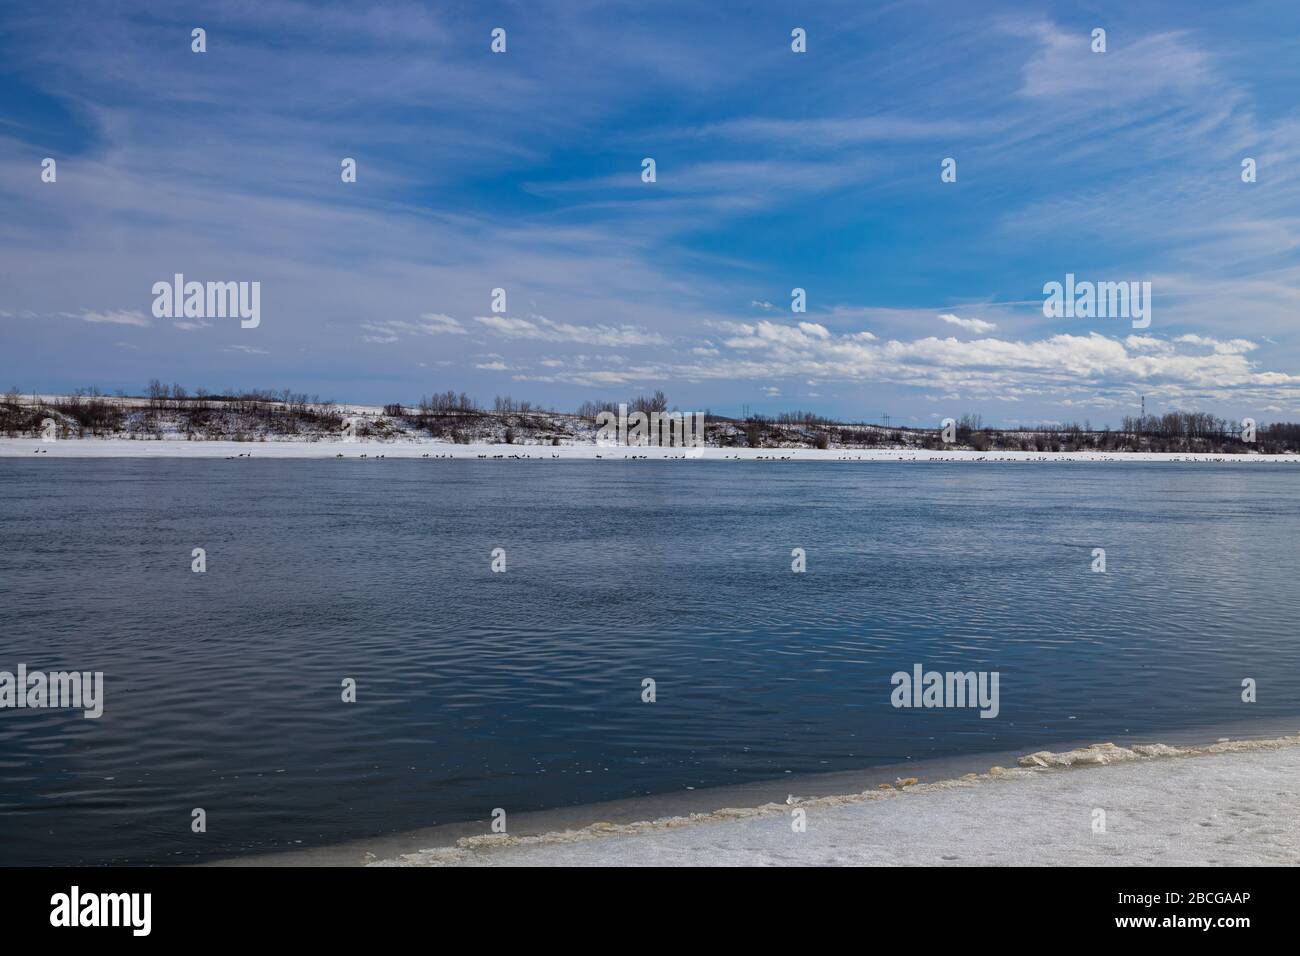 beautiful views of the South Saskatchewan River partially frozen in the early spring season Stock Photo